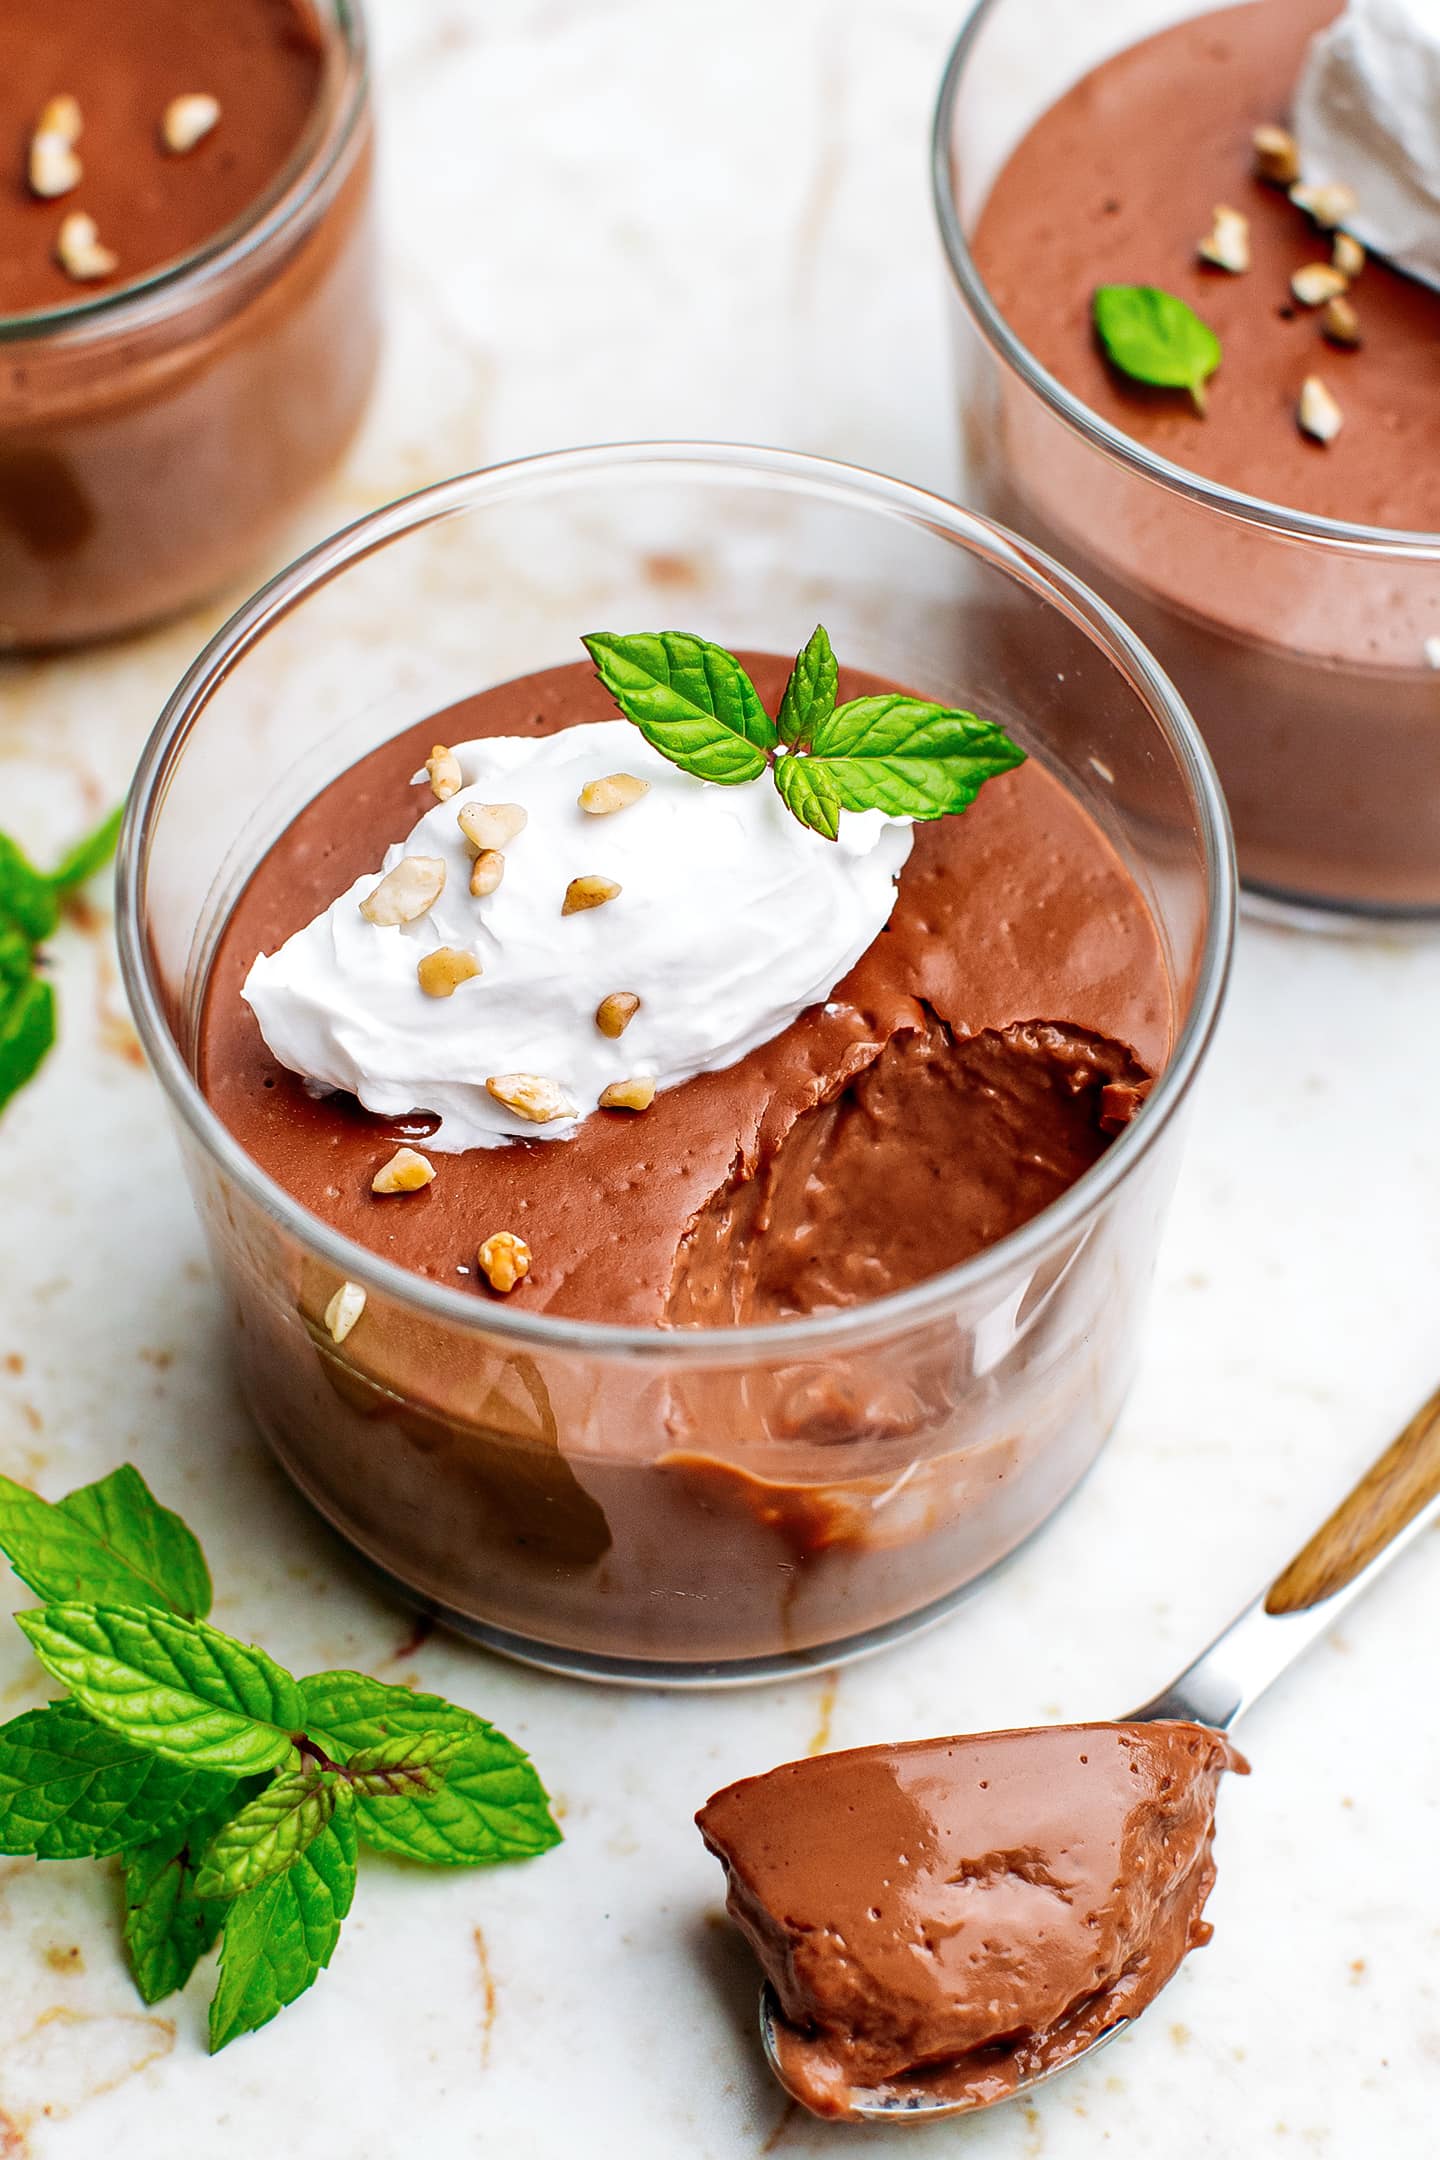 Chocolate pot de crème with coconut cream, crushed nuts, and mint leaves.